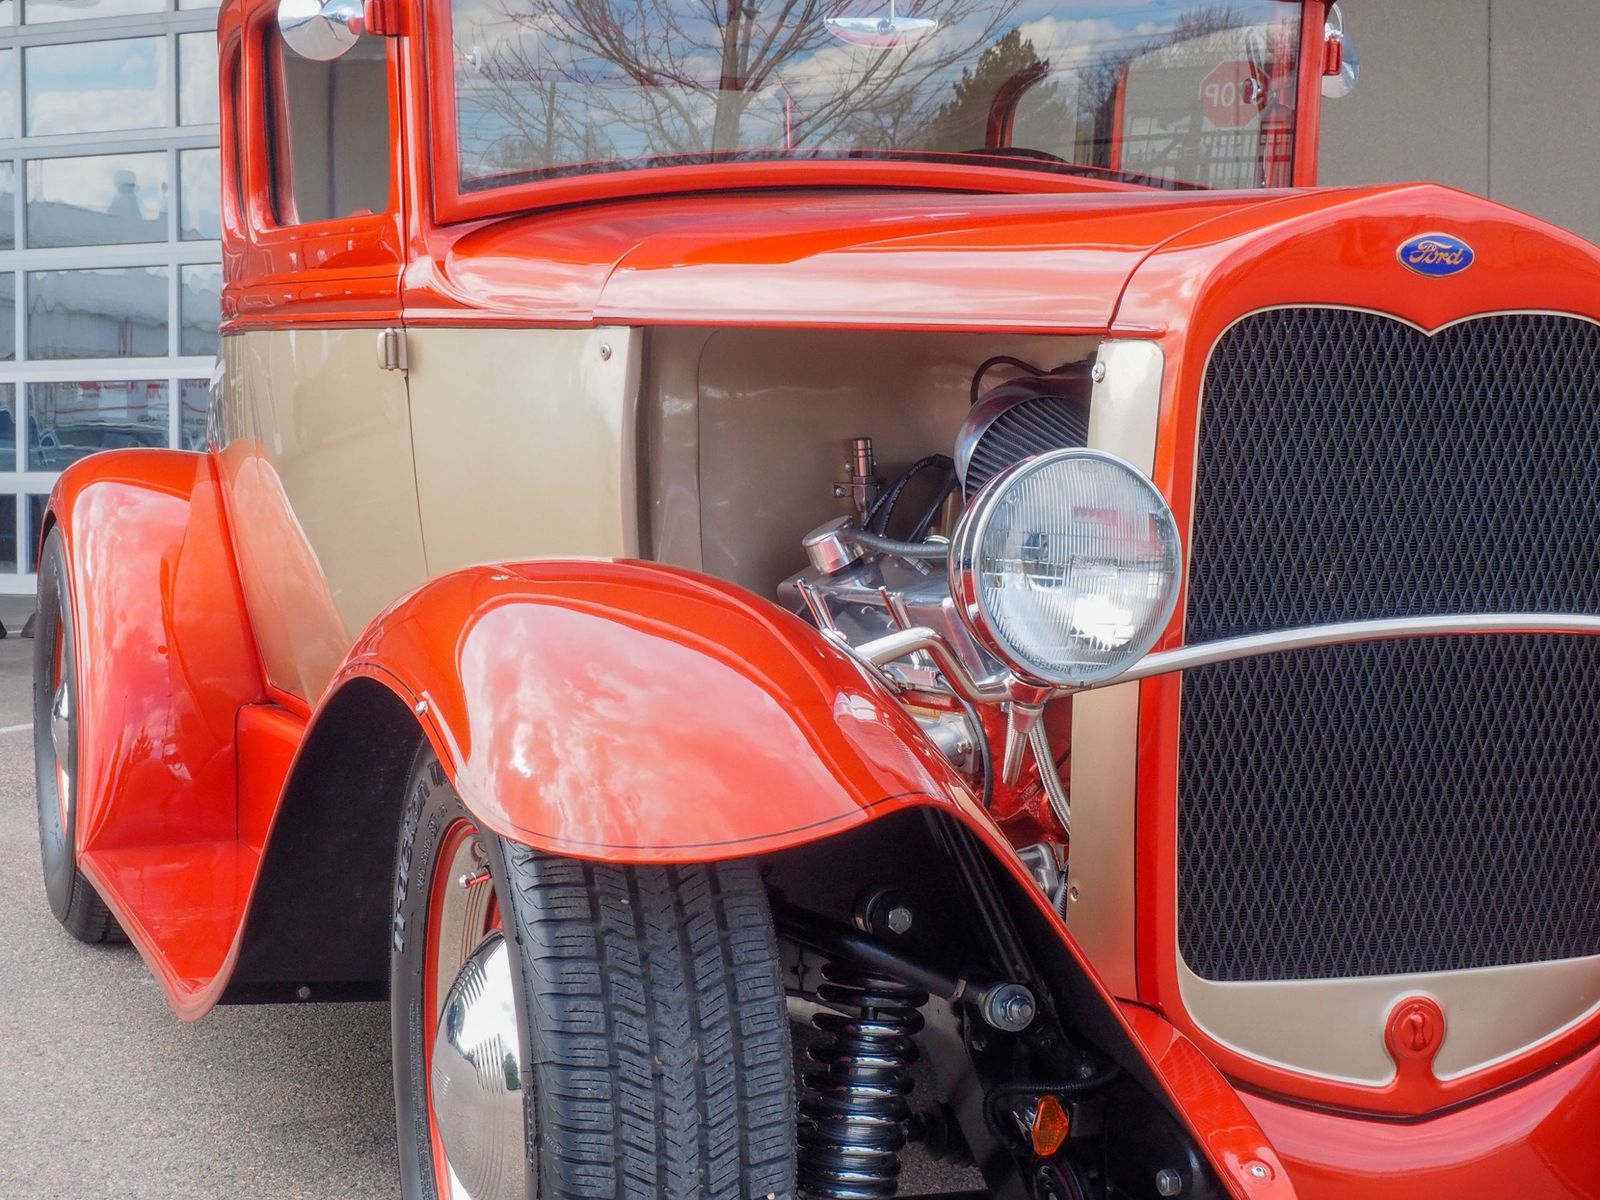 1930 Ford Model A 12